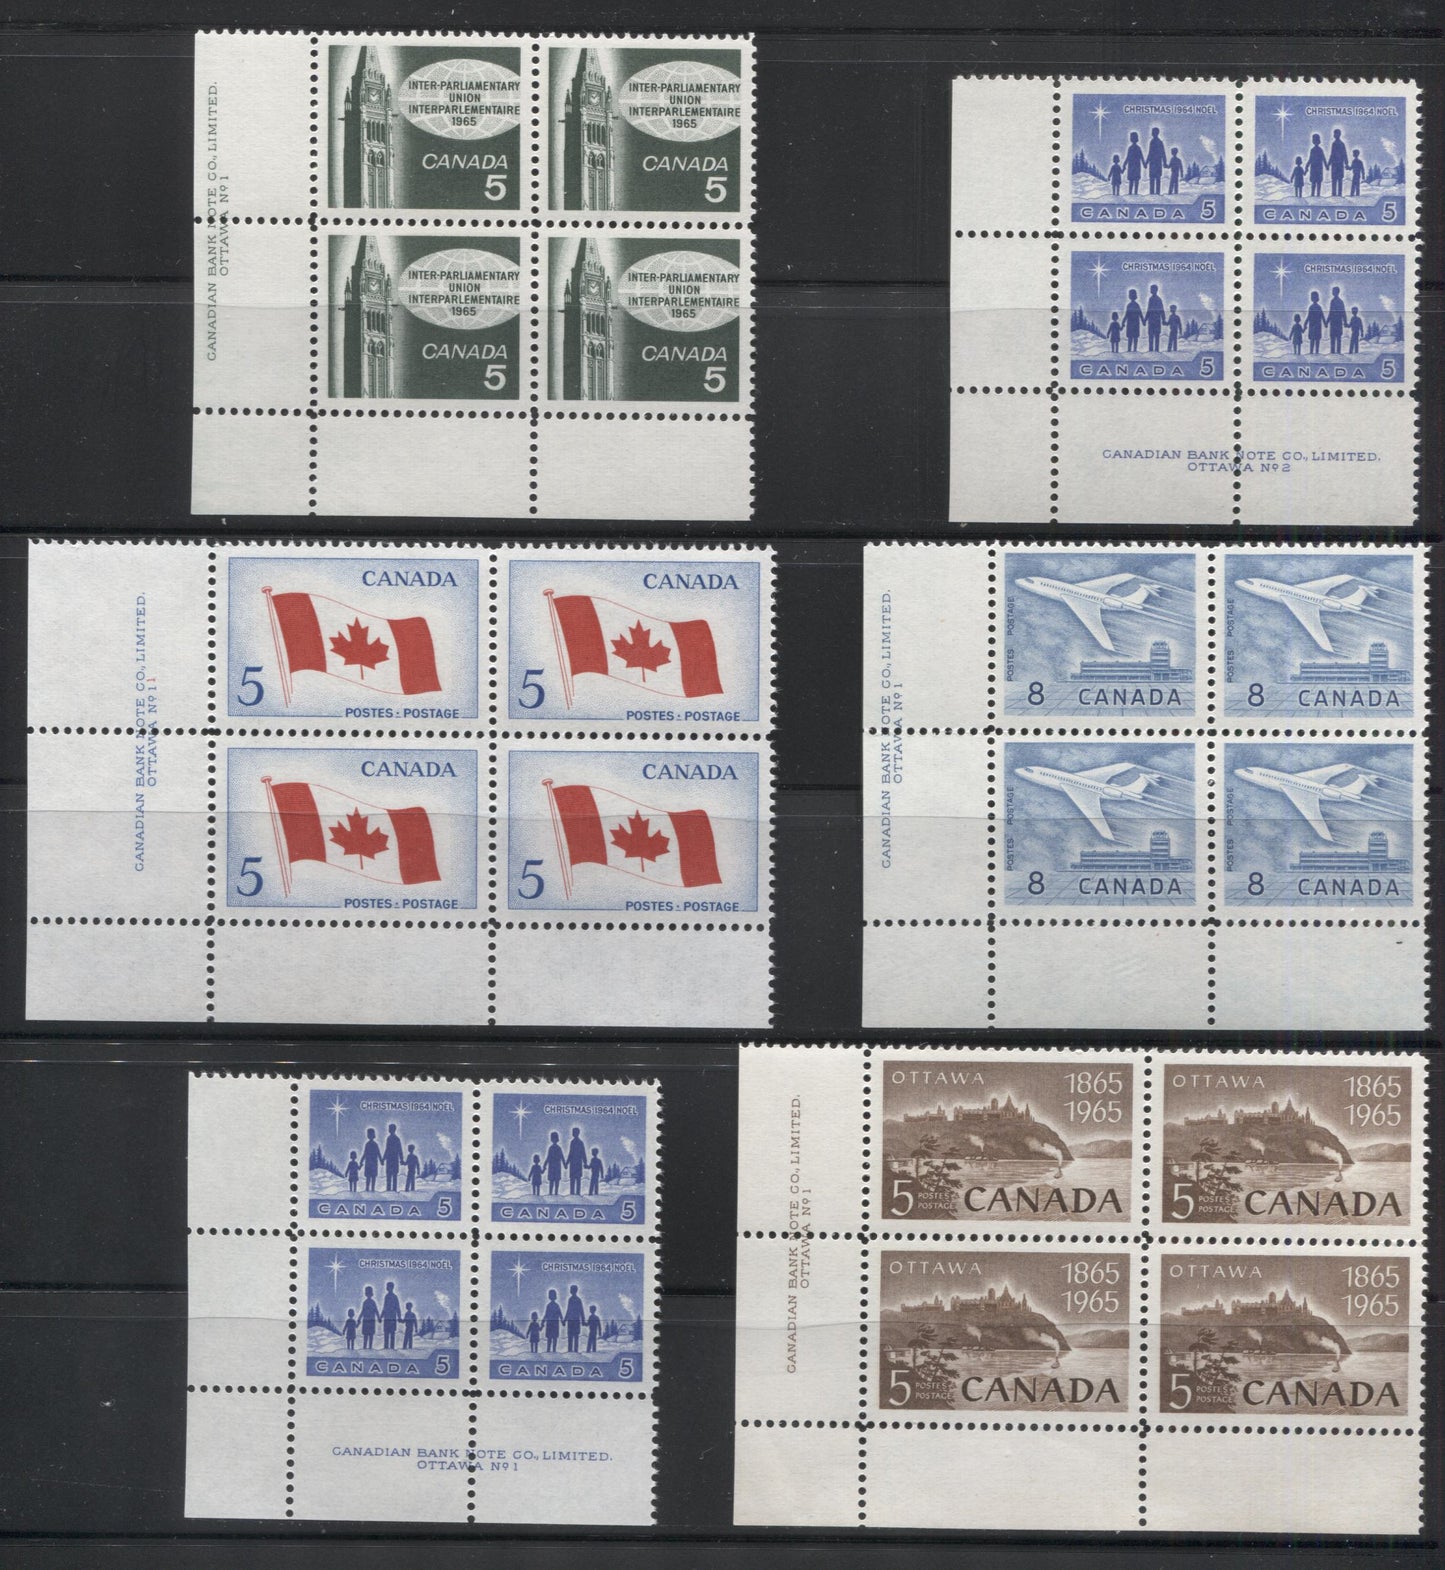 Lot 30 Canada #435-442 5c & 8c Blue - Brown Star Of Bethlehem - Parliament Buildings, 1964-1965 Commemorative & Definitives, 9 VFNH LL Plates 1-2 Blocks Of 4, 435i and 436i are on Fluorescent Paper